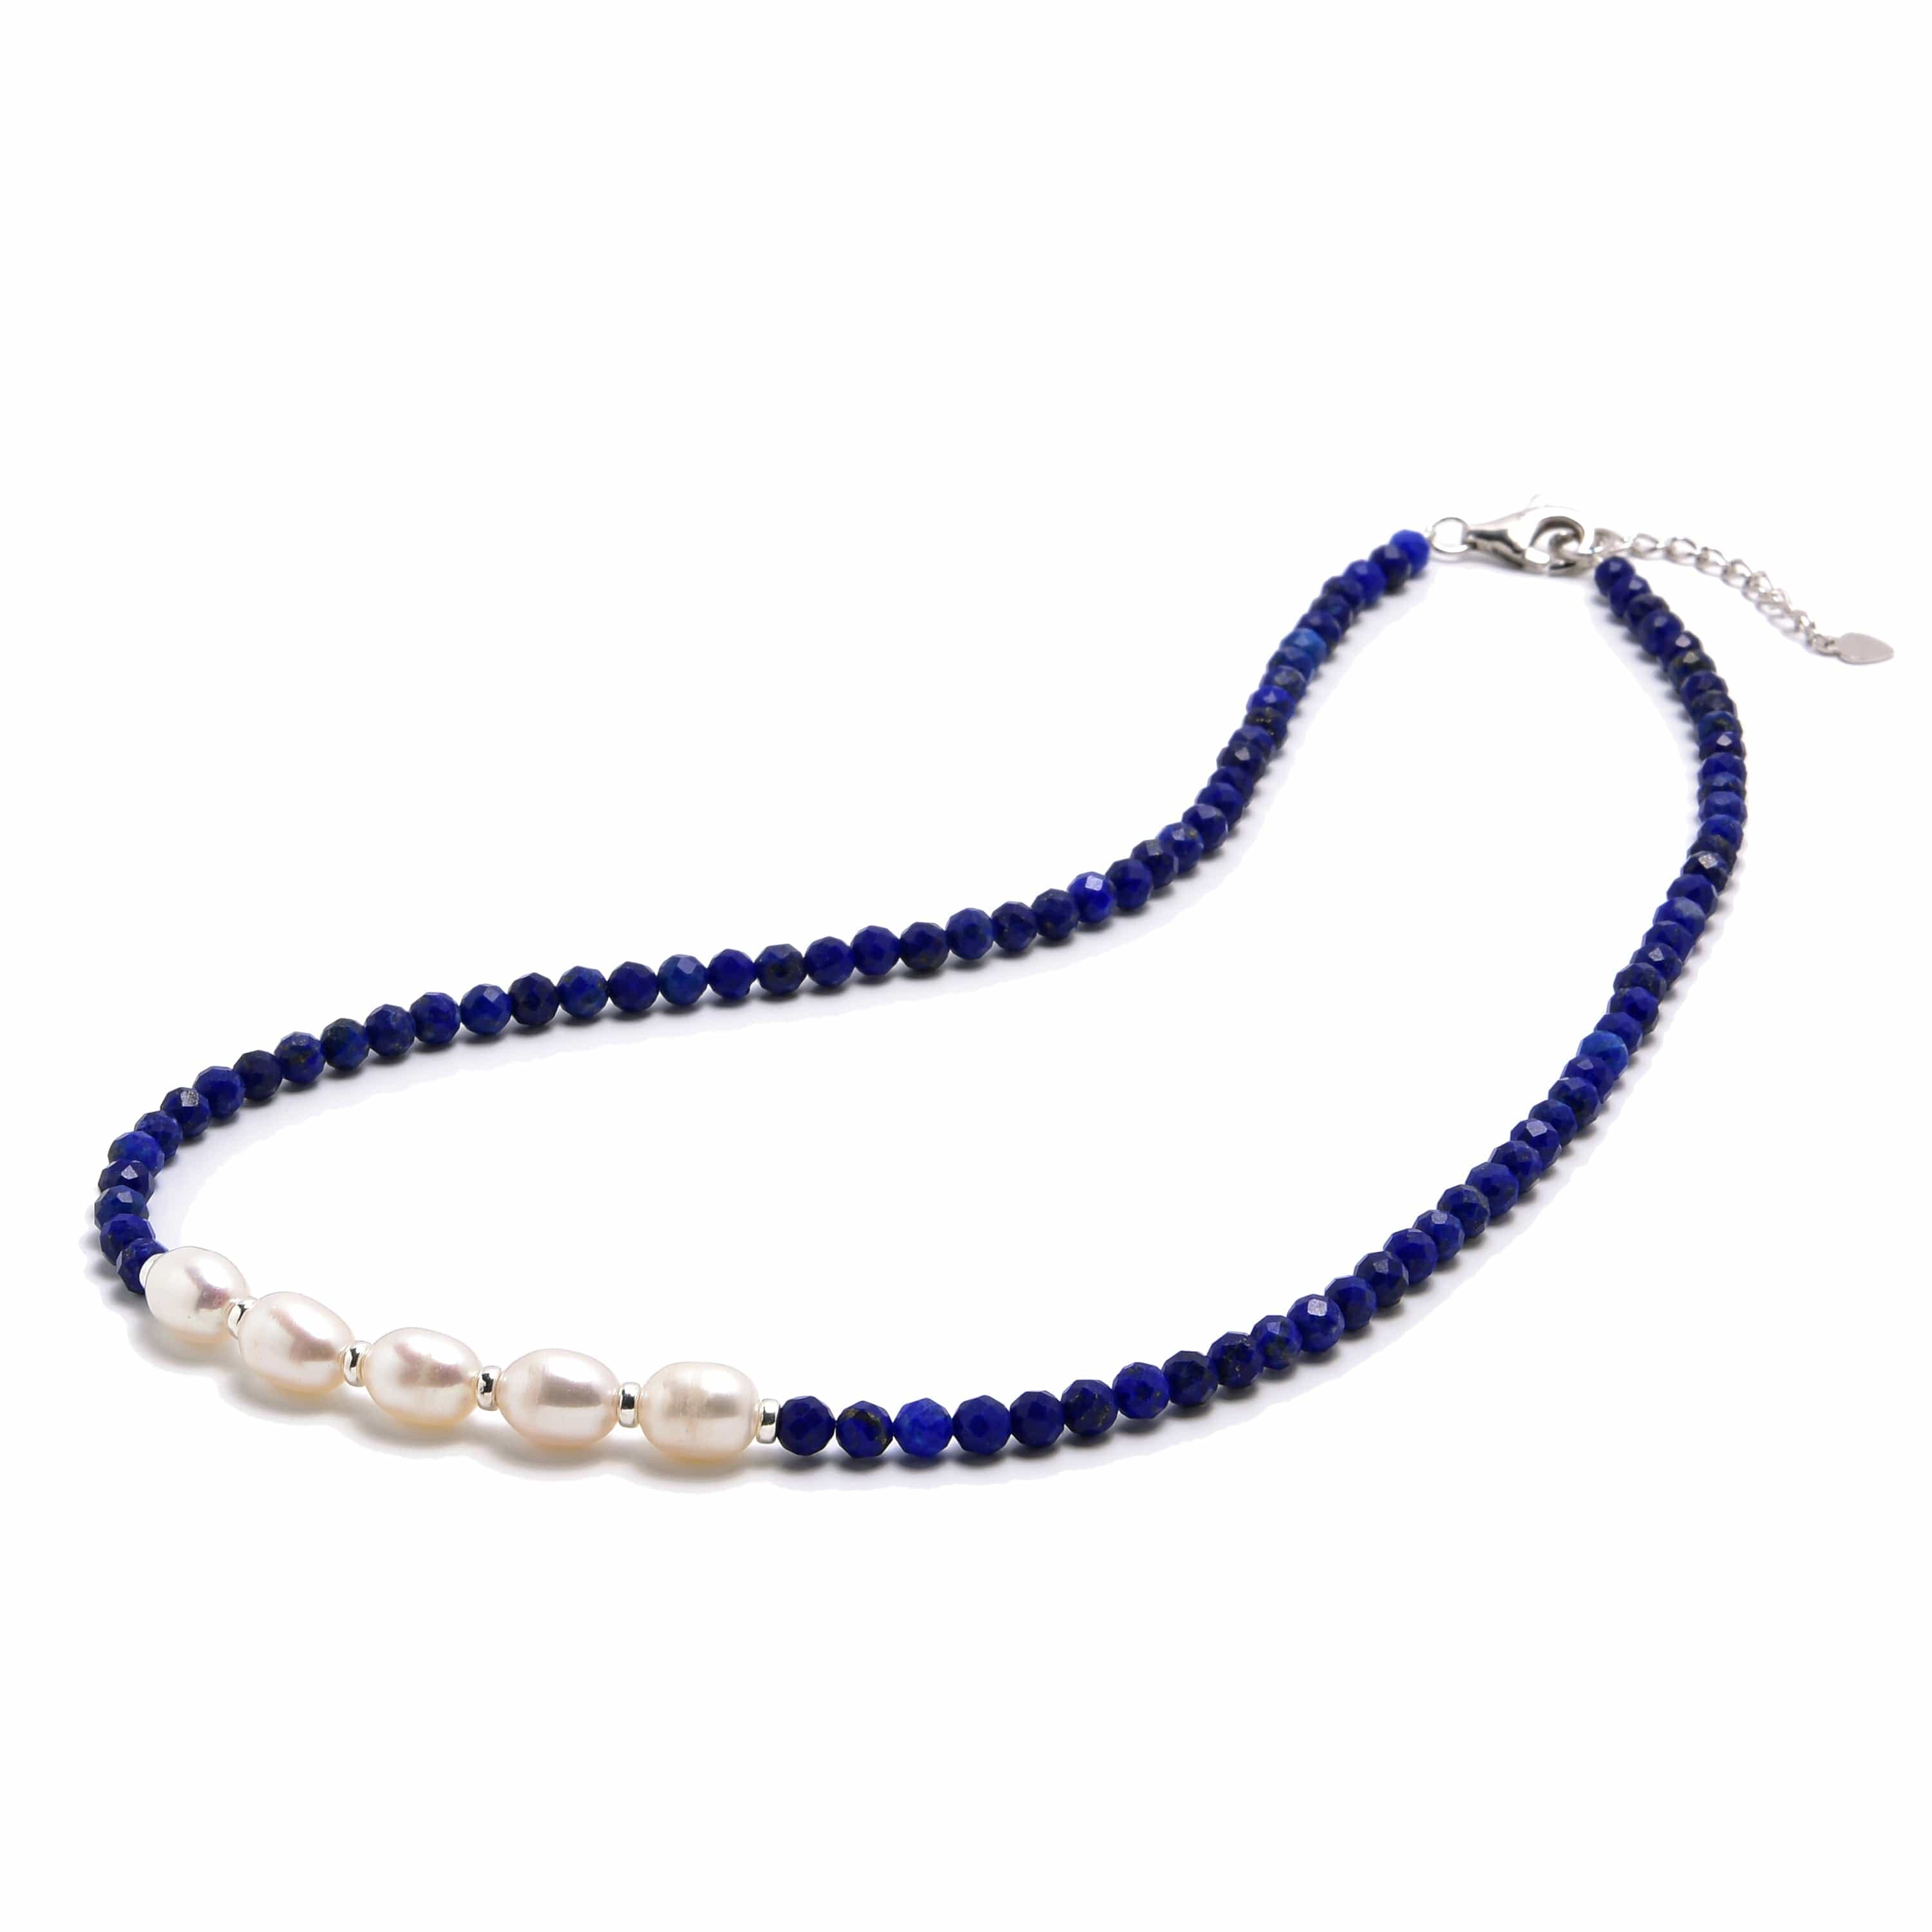 KALIFANO Jewelry 4mm Faceted Lapis Bead Necklace with 5 Pearls with 925 Silver Clasp 4MLP